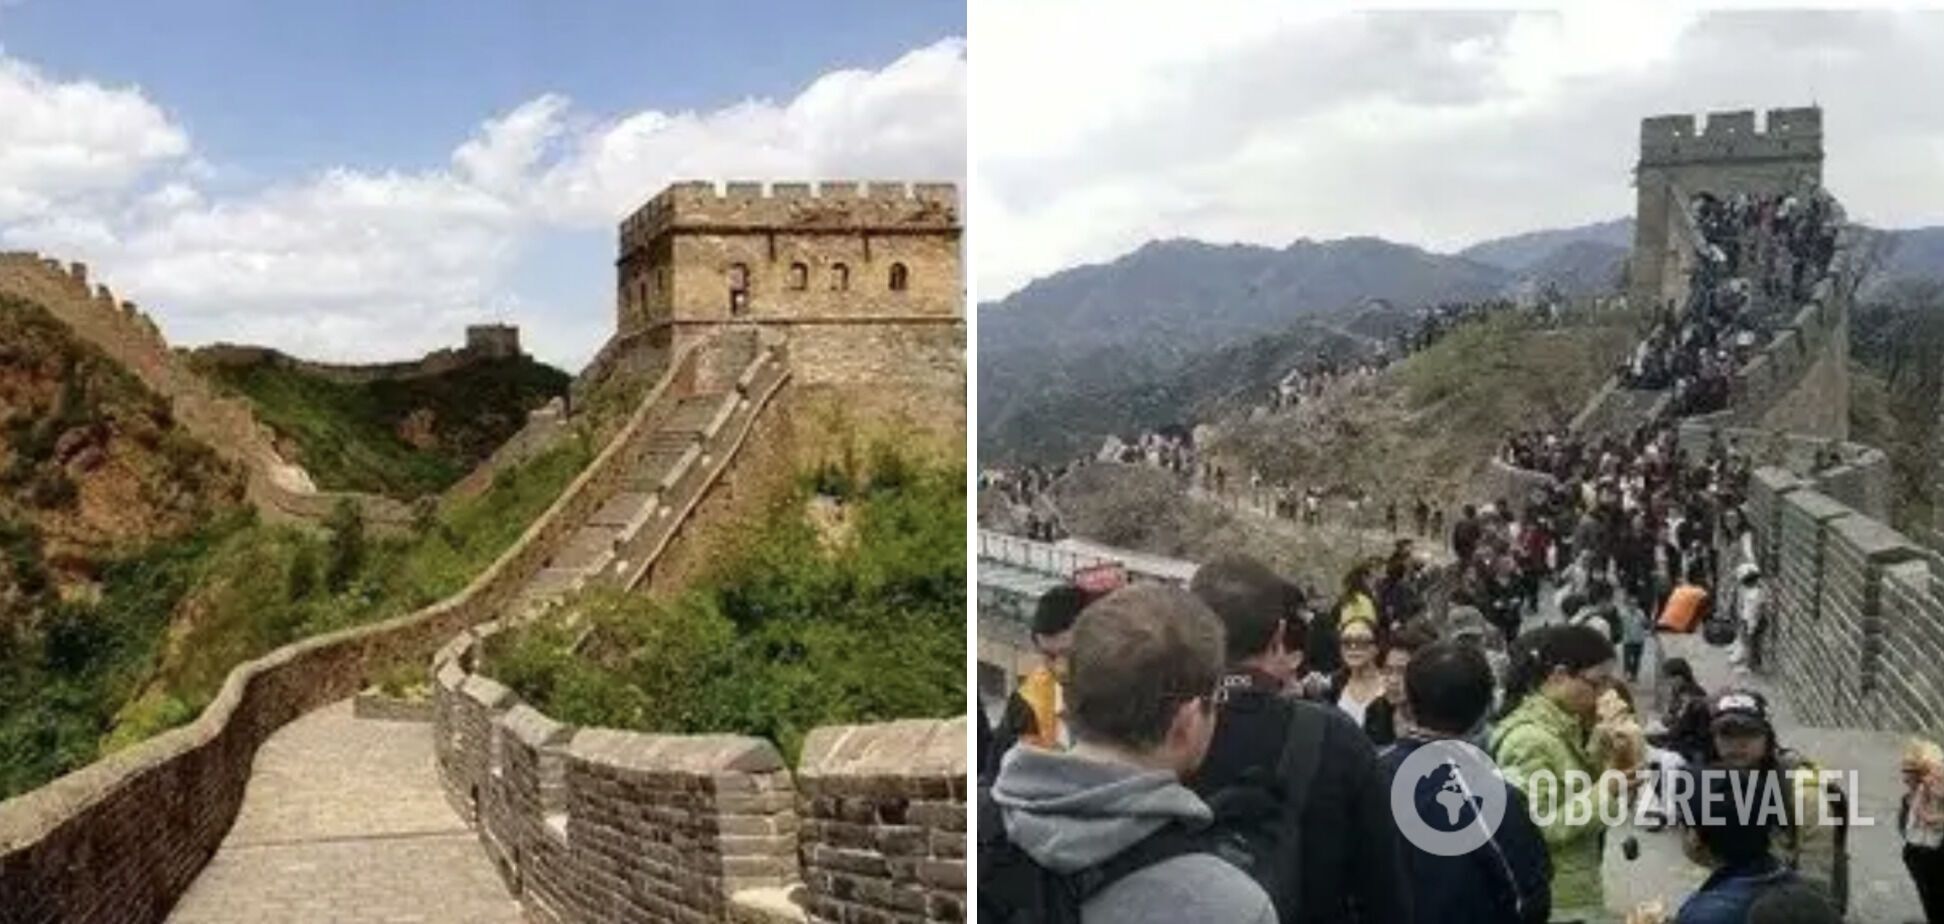 The Great Wall of China is surrounded by tourists